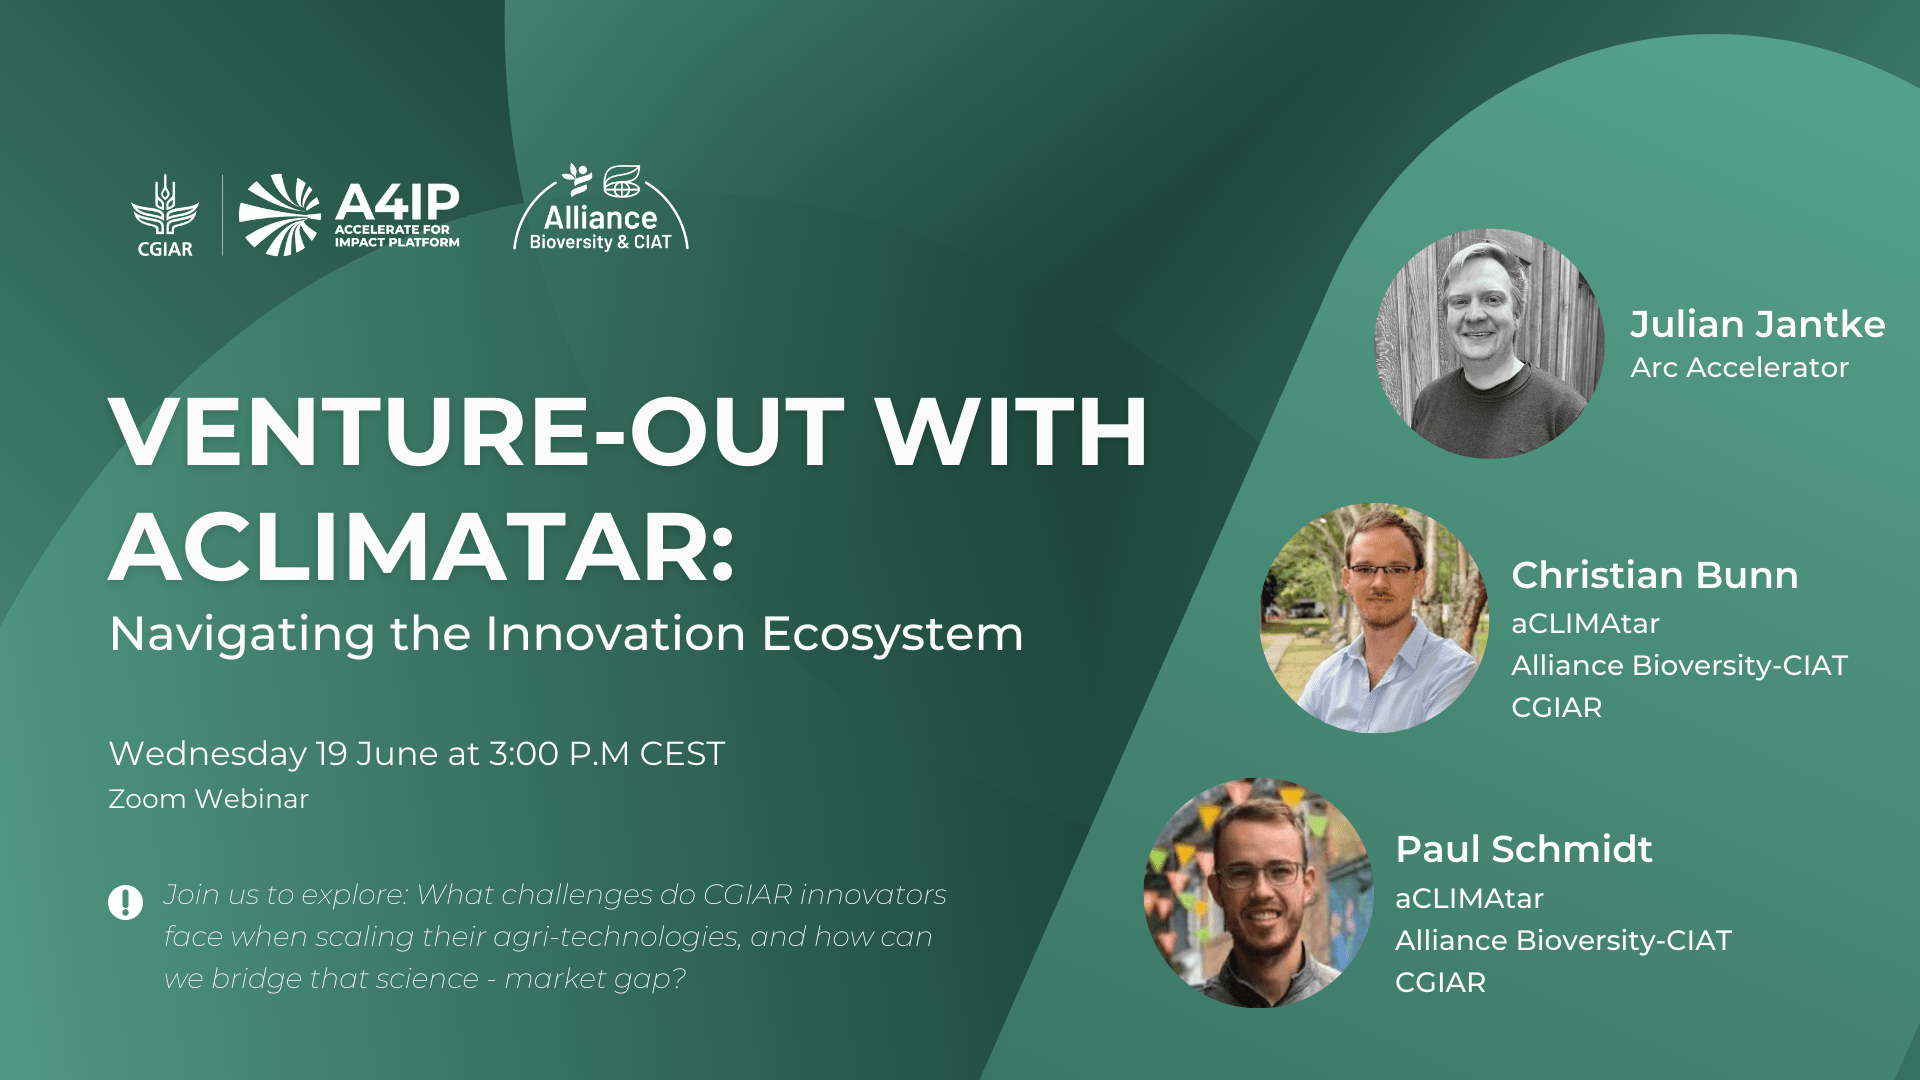 Venture-Out with aCLIMAtar: Navigating the Innovation Ecosystem 